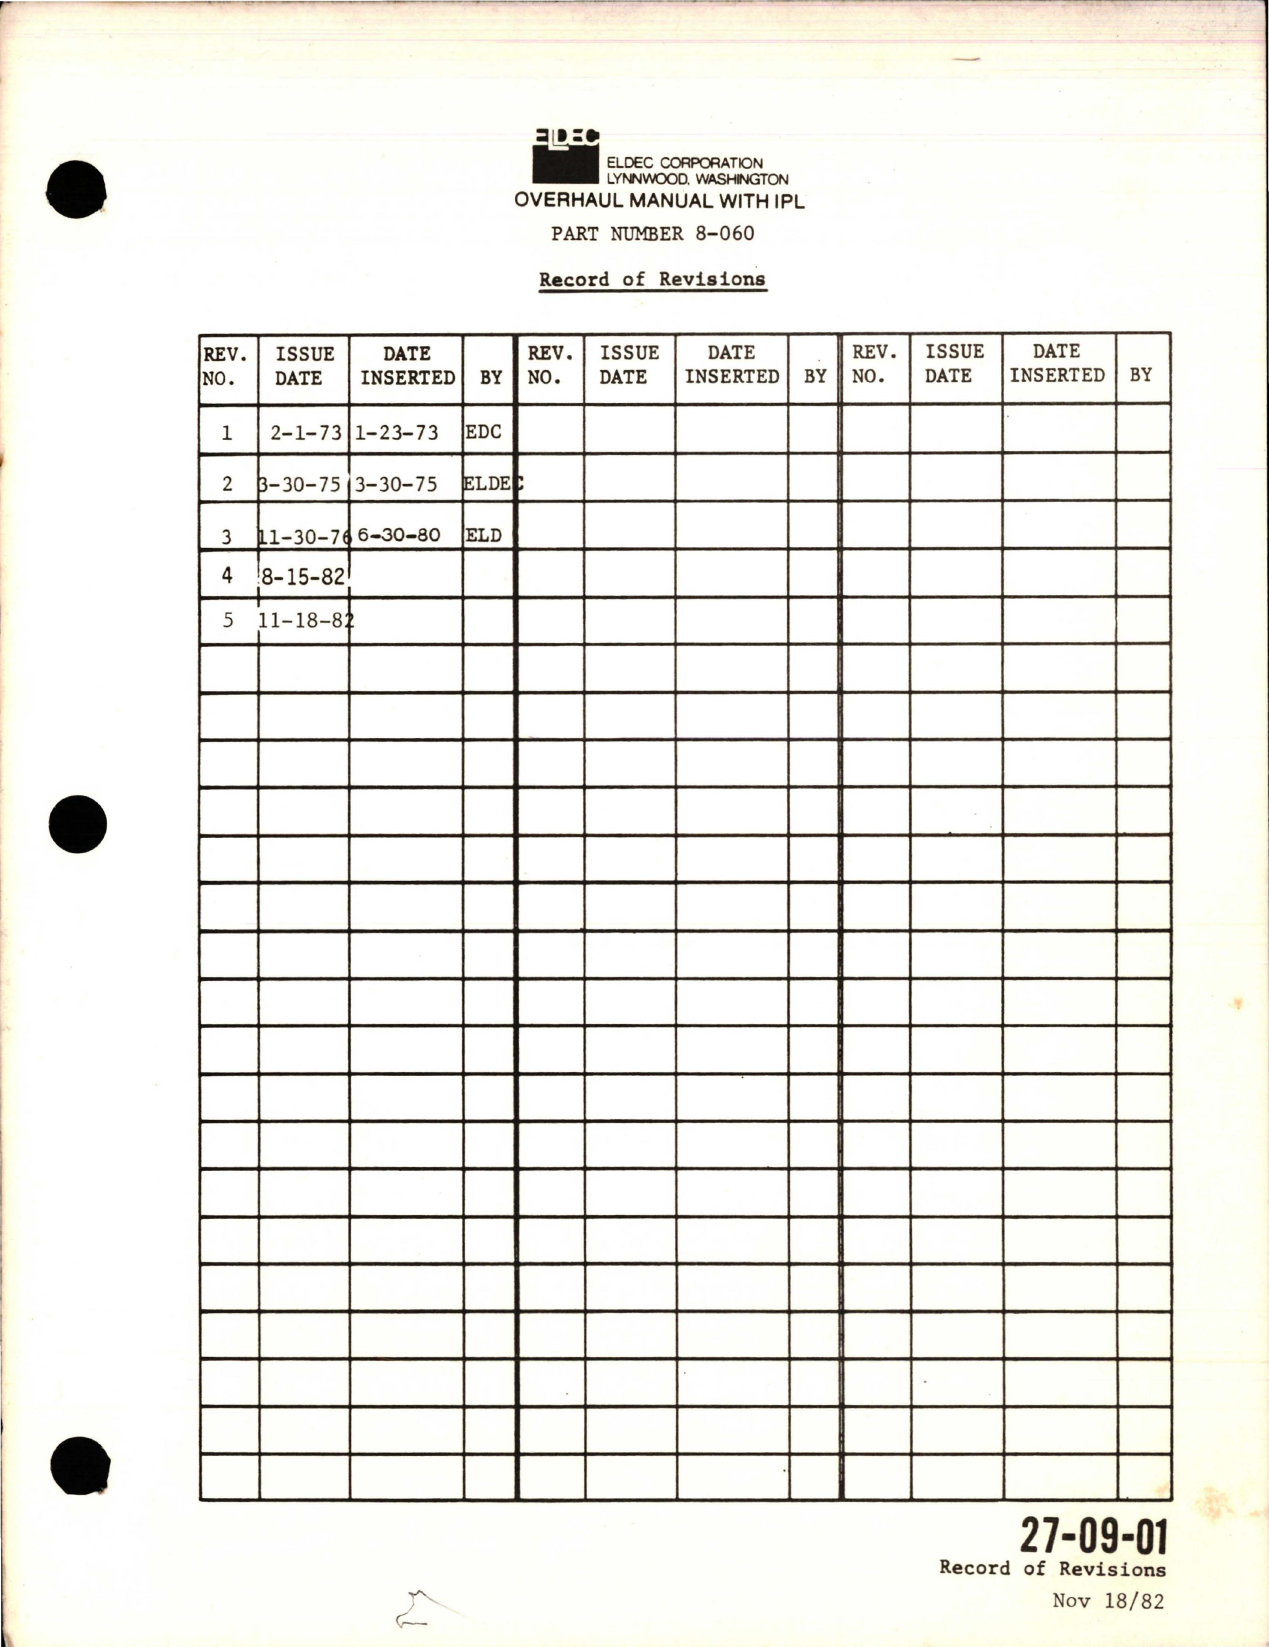 Sample page 5 from AirCorps Library document: Overhaul with Illustrated Parts List for Solid State Proximity Switch PC Assembly - Parts 8-060-02, 8-060-07, and 8-060-10